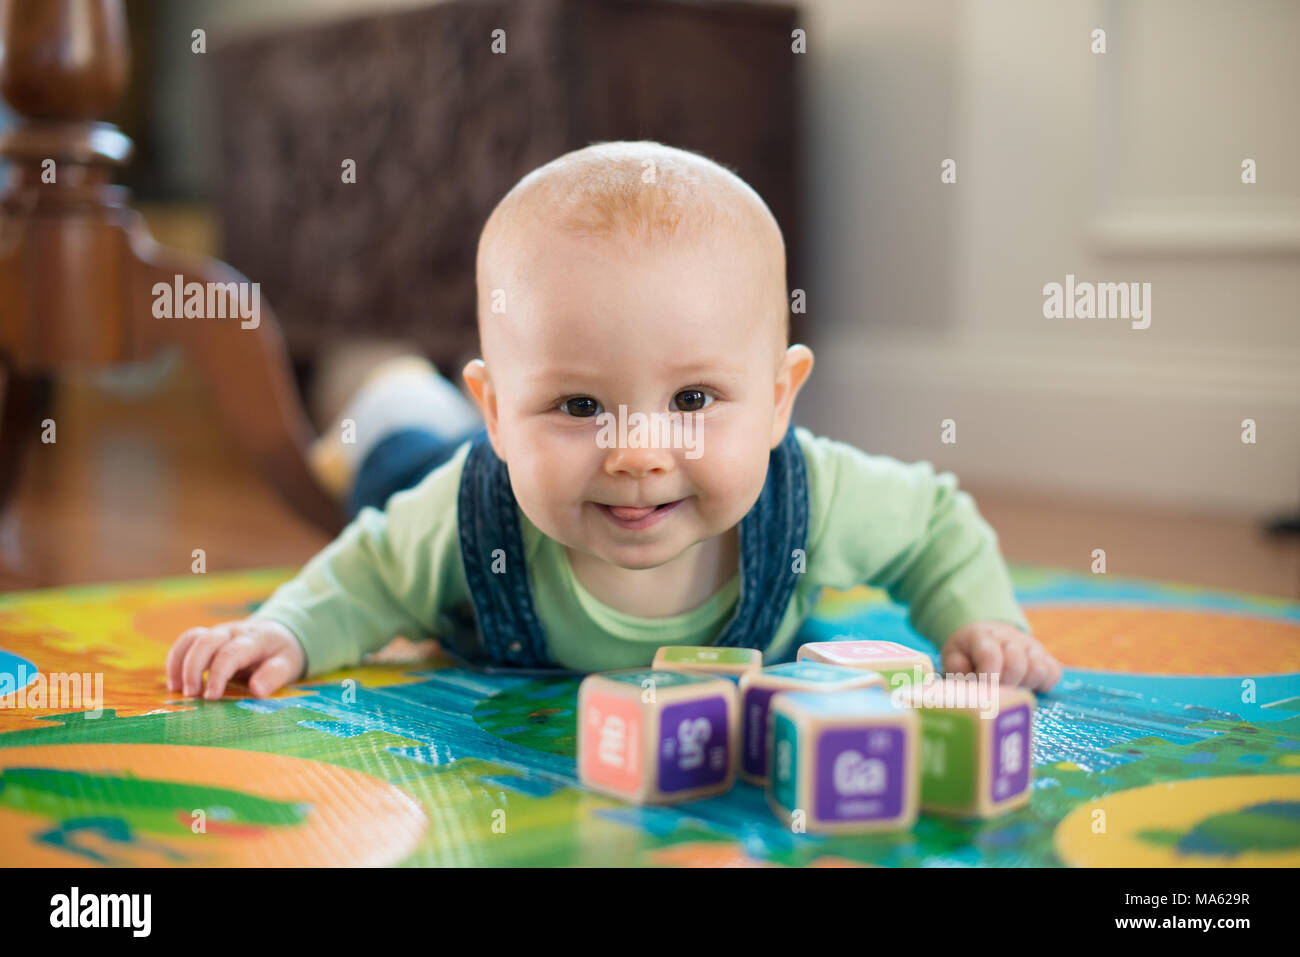 A six month old baby girl at play. Stock Photo